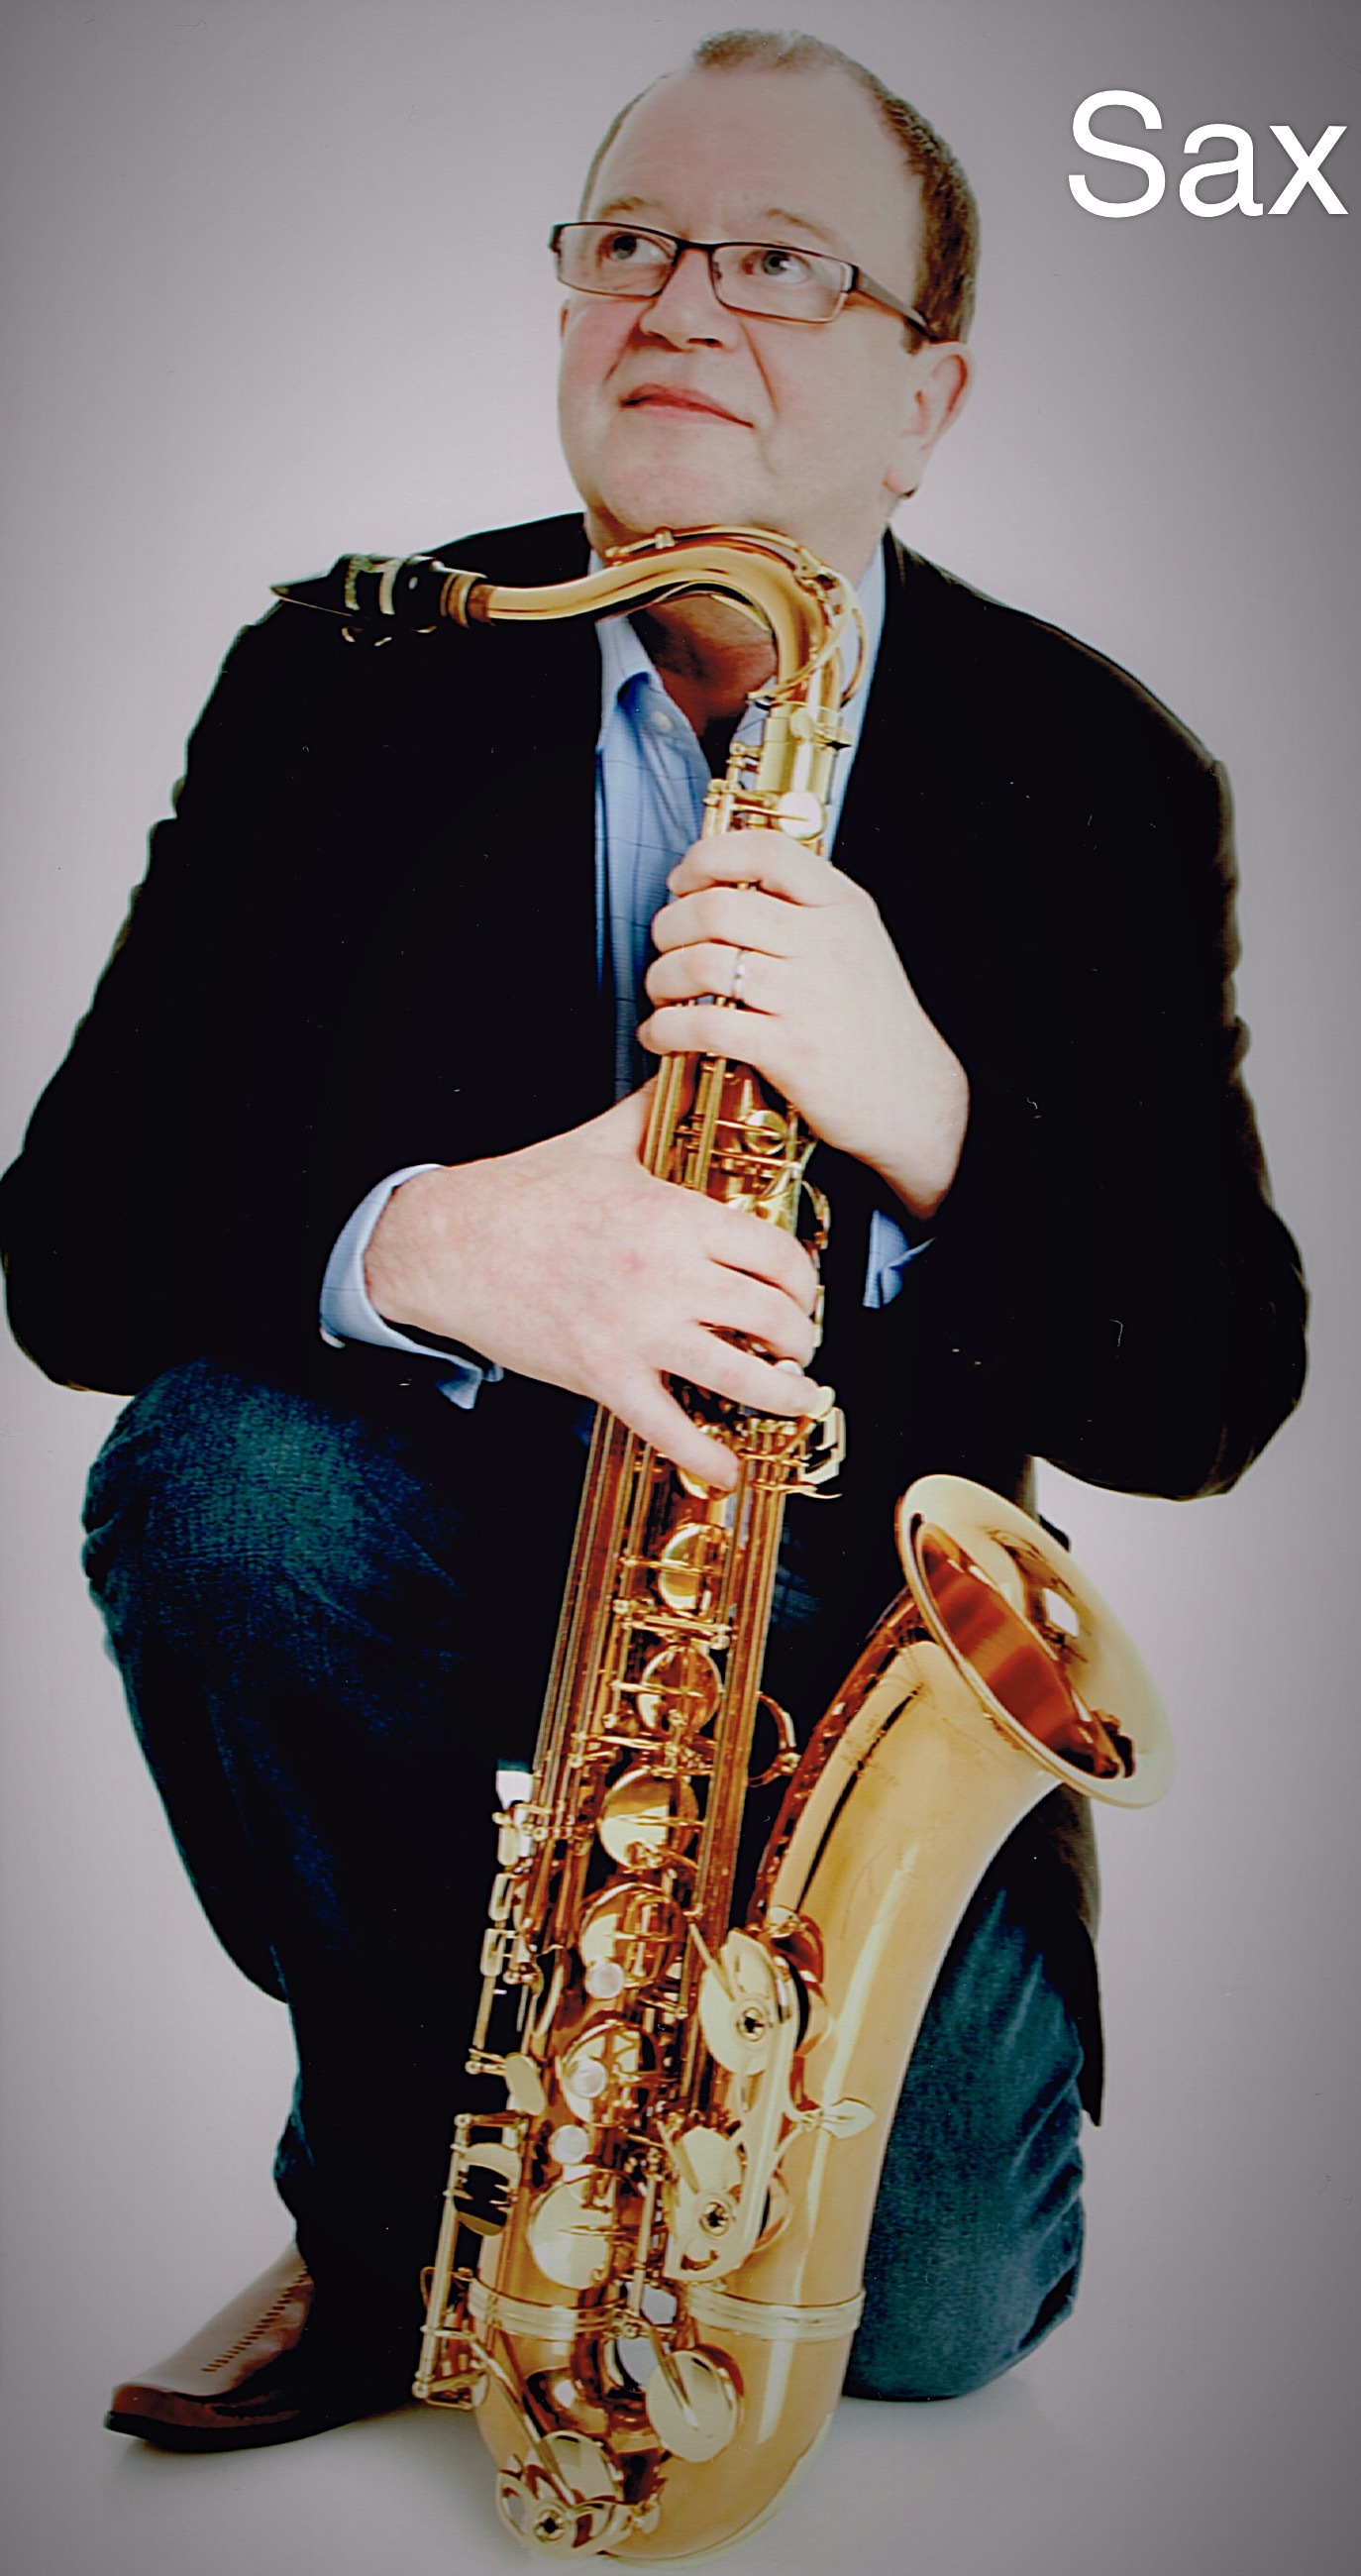 Saxophonist Ken in Dumfries and Galloway, the Scottish Borders